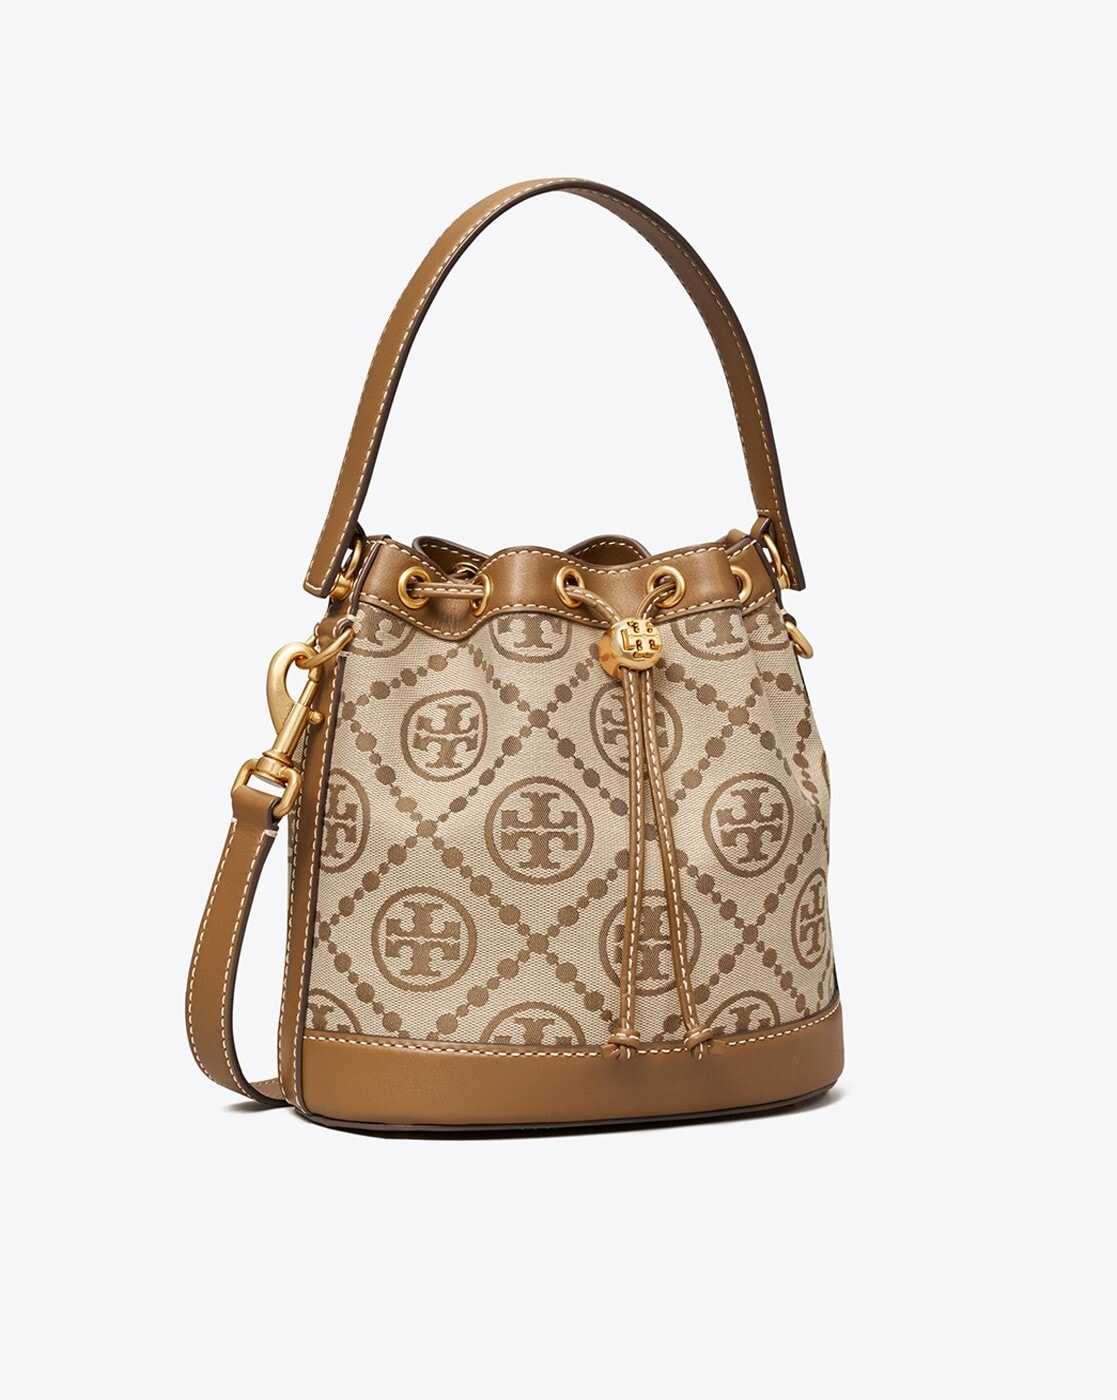 Tory Burch T Monogram Coated Canvas Small Tote in Black